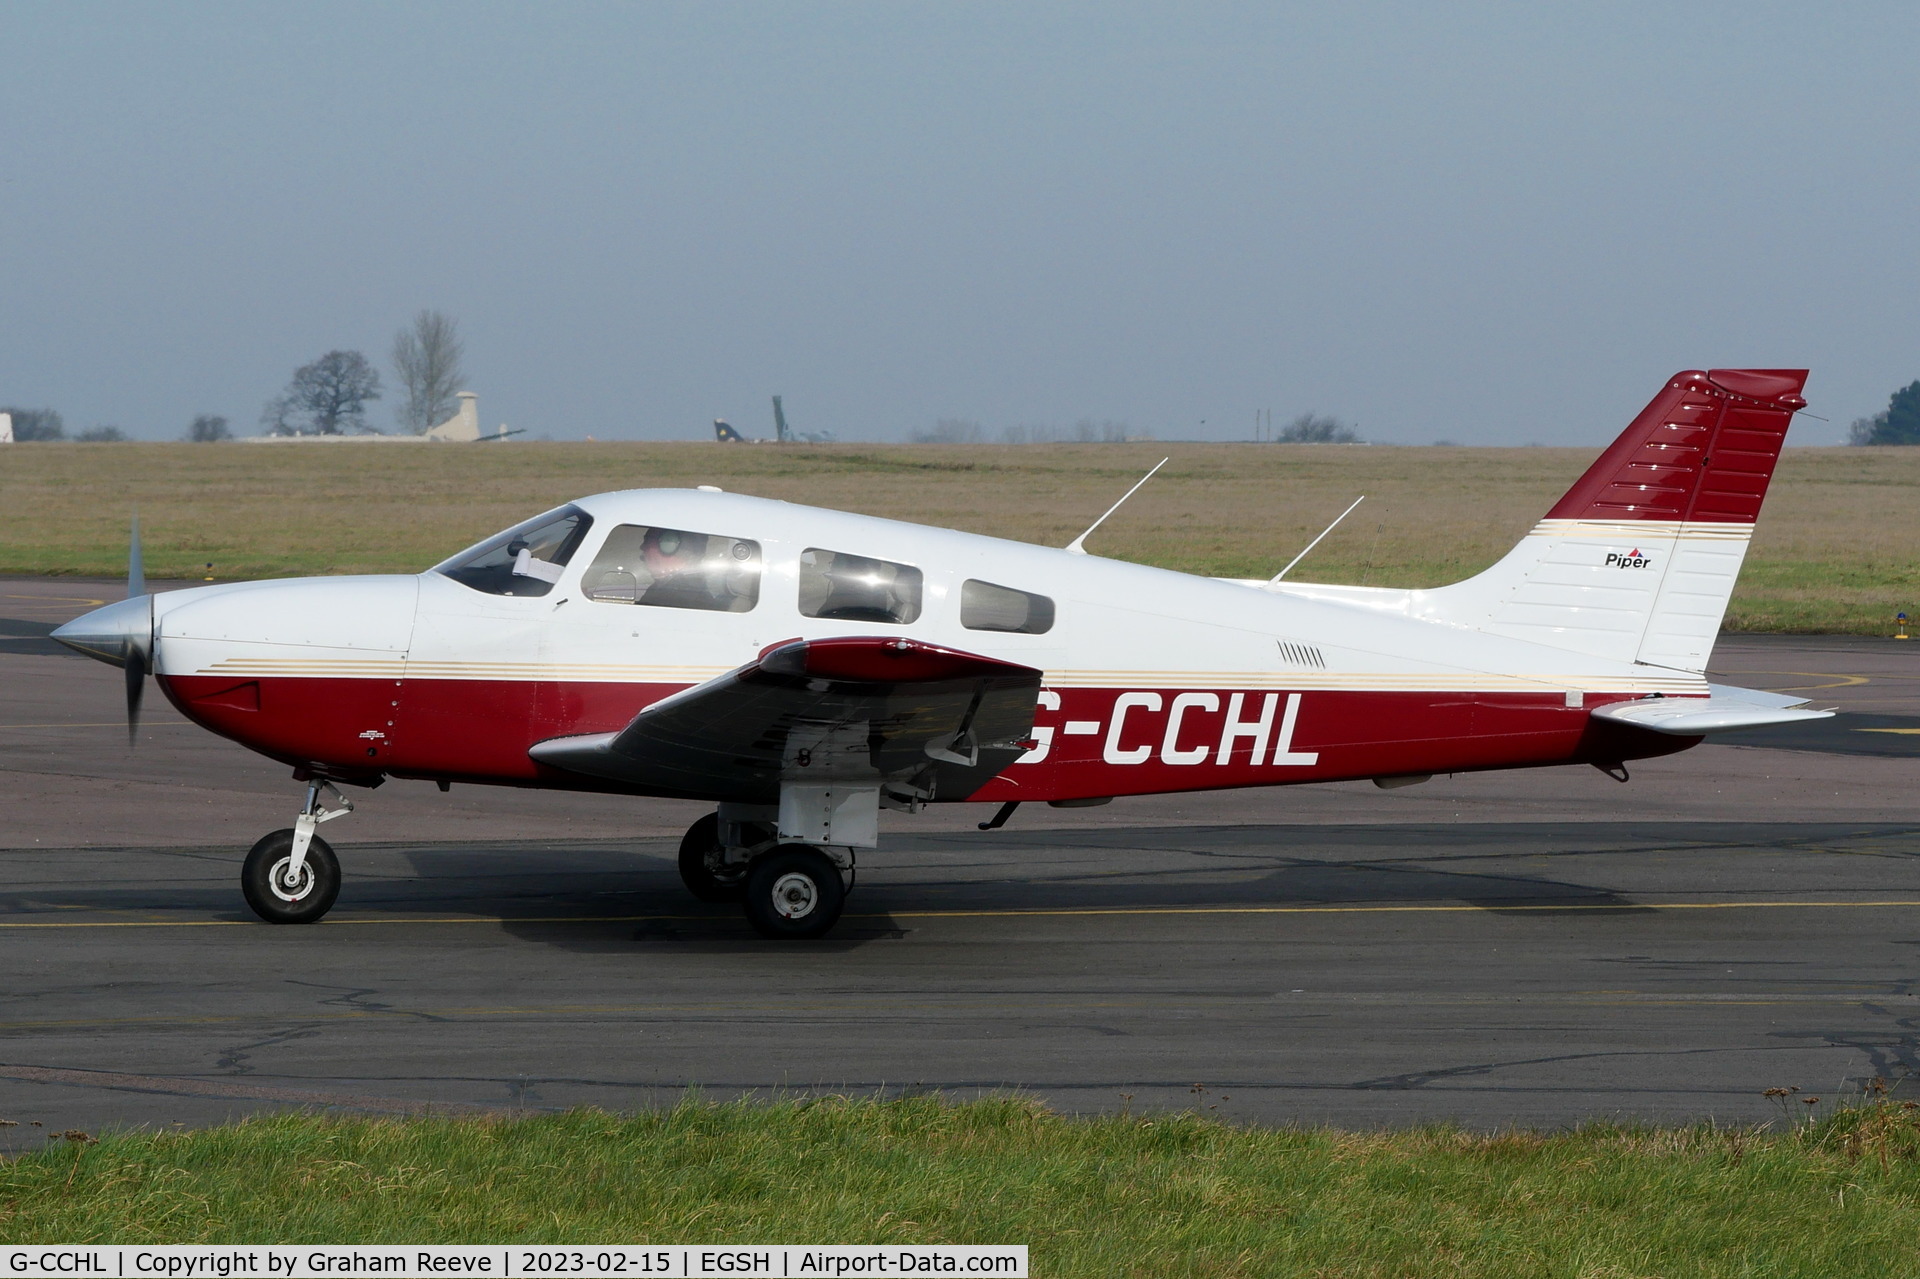 G-CCHL, 1998 Piper PA-28-181 Cherokee Archer III C/N 2843176, Just landed at Norwich.